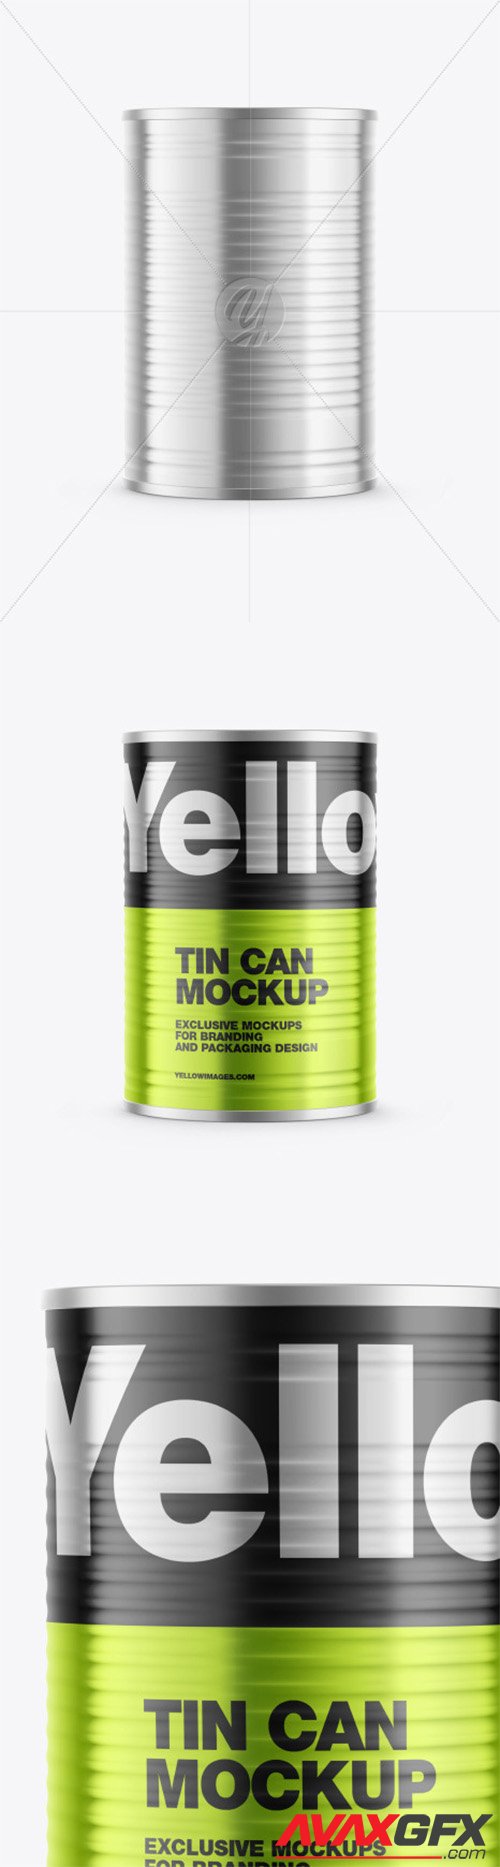 Download 27 4 Glossy Cans In Shrink Wrap Front View Yellowimages Yellowimages Mockups